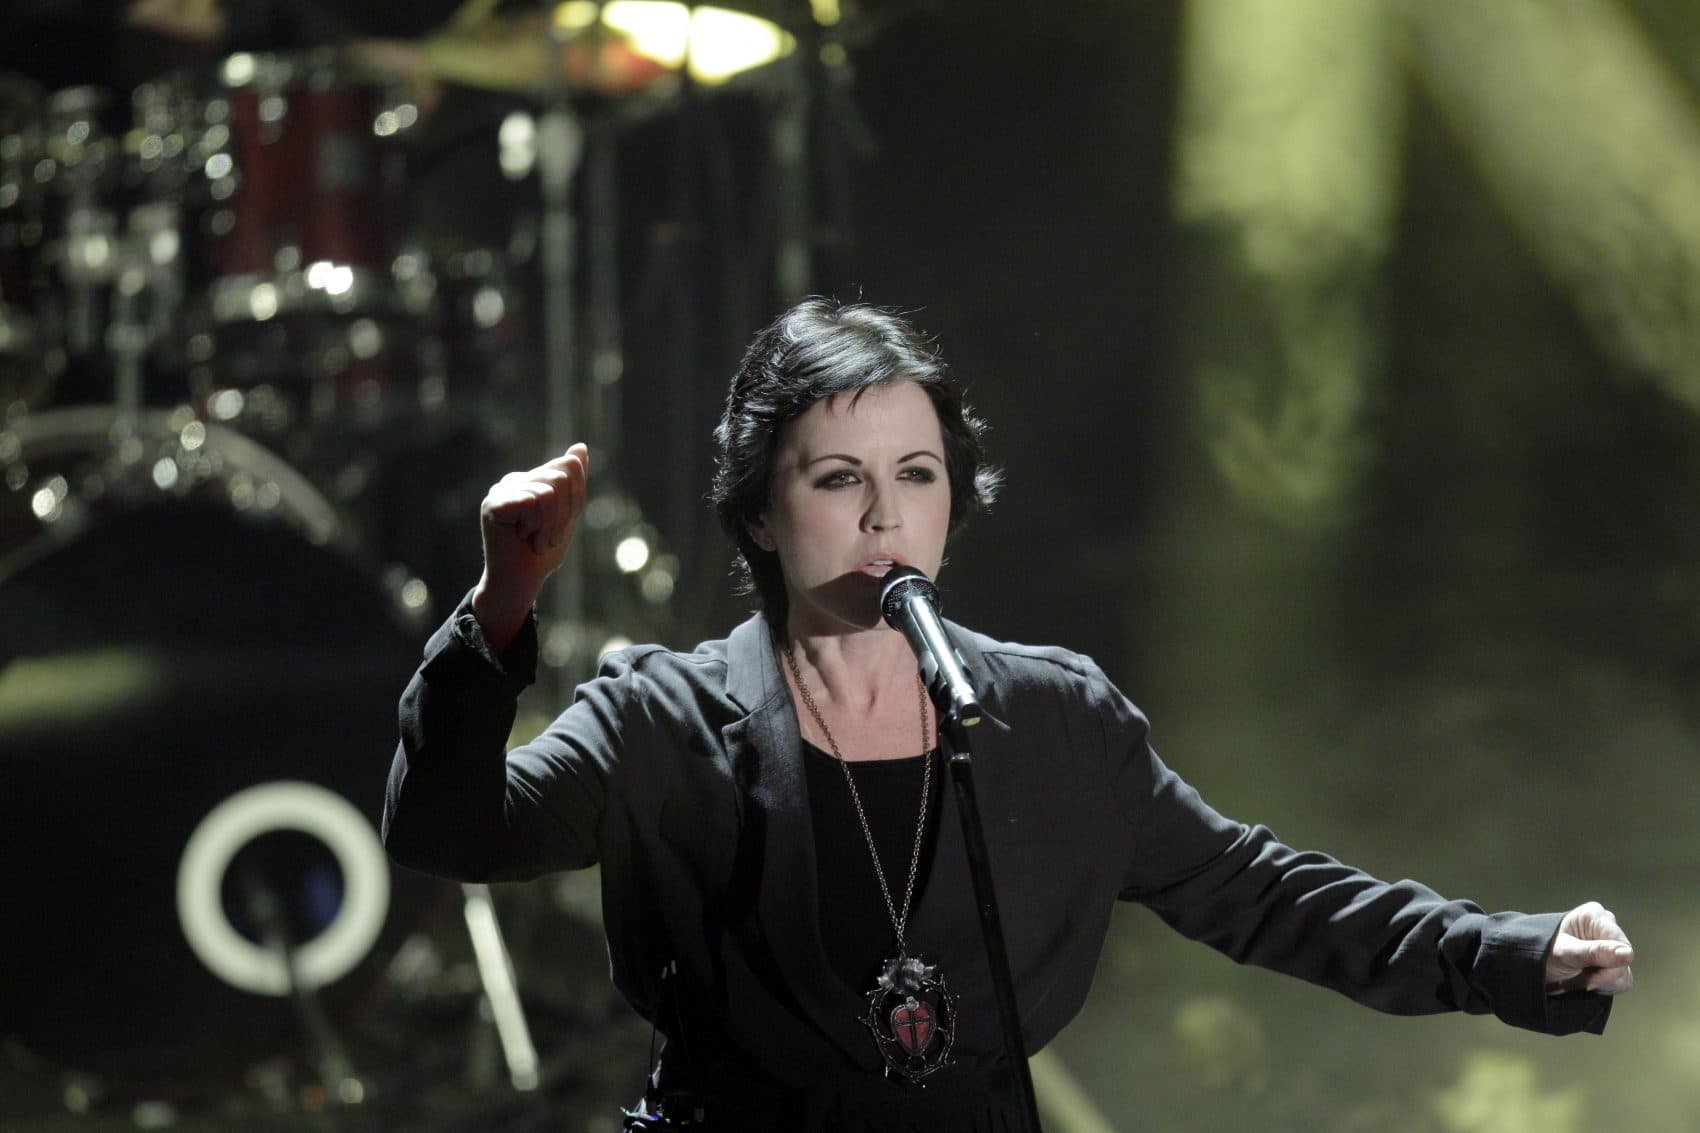 Dolores O'Riordan, former frontwoman of Irish band The Cranberries, performs in Italy on Saturday, Feb. 18, 2012. (Luca Bruno/AP)